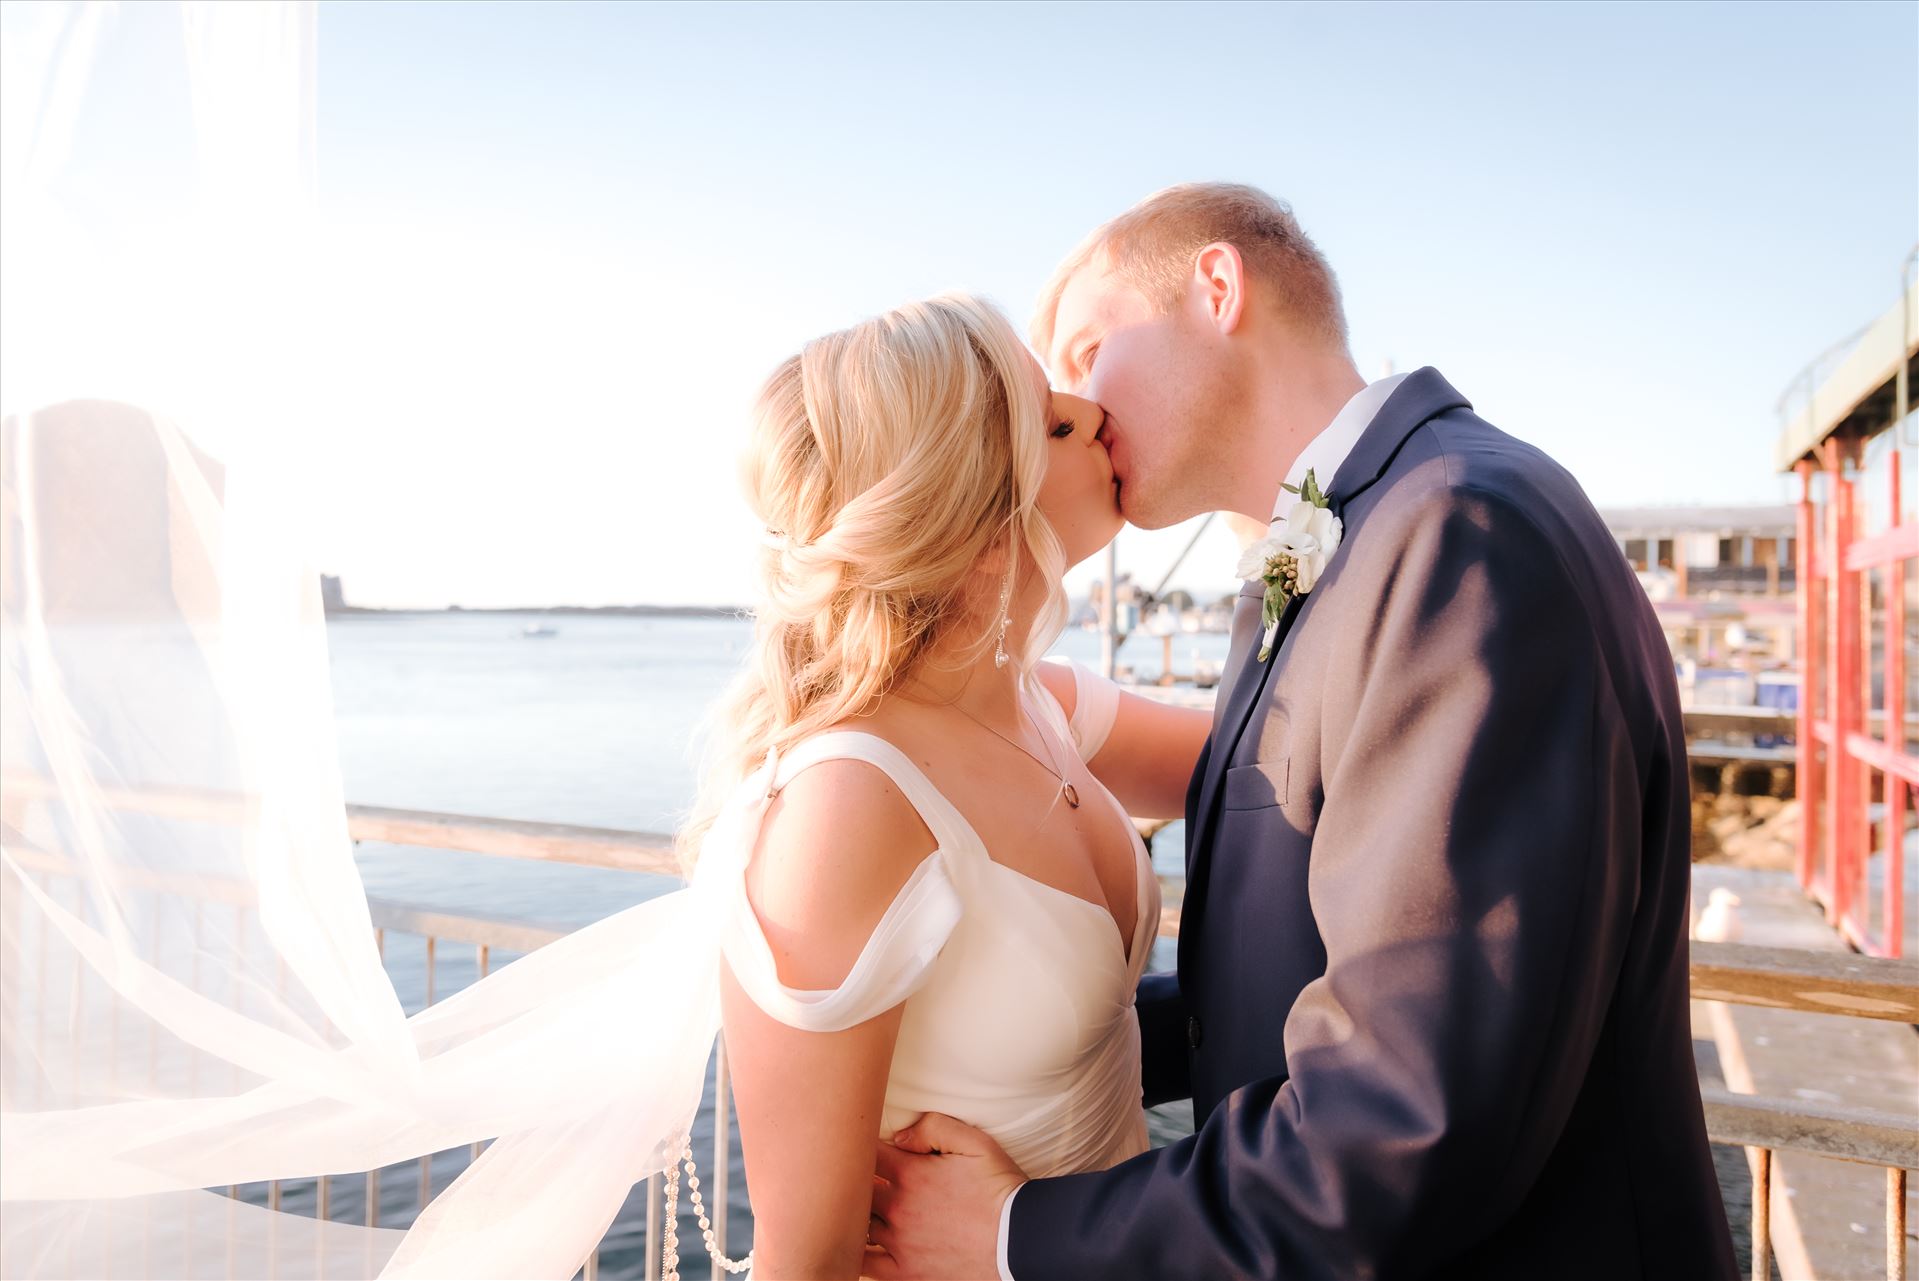 FW-9774.JPG Sarah Williams of Mirror's Edge Photography, a San Luis Obispo Wedding and Engagement Photographer, captures Ryan and Joanna's wedding at the iconic Windows on the Water Restaurant in Morro Bay, California.  Bride and Groom kiss with ocean in background by Sarah Williams